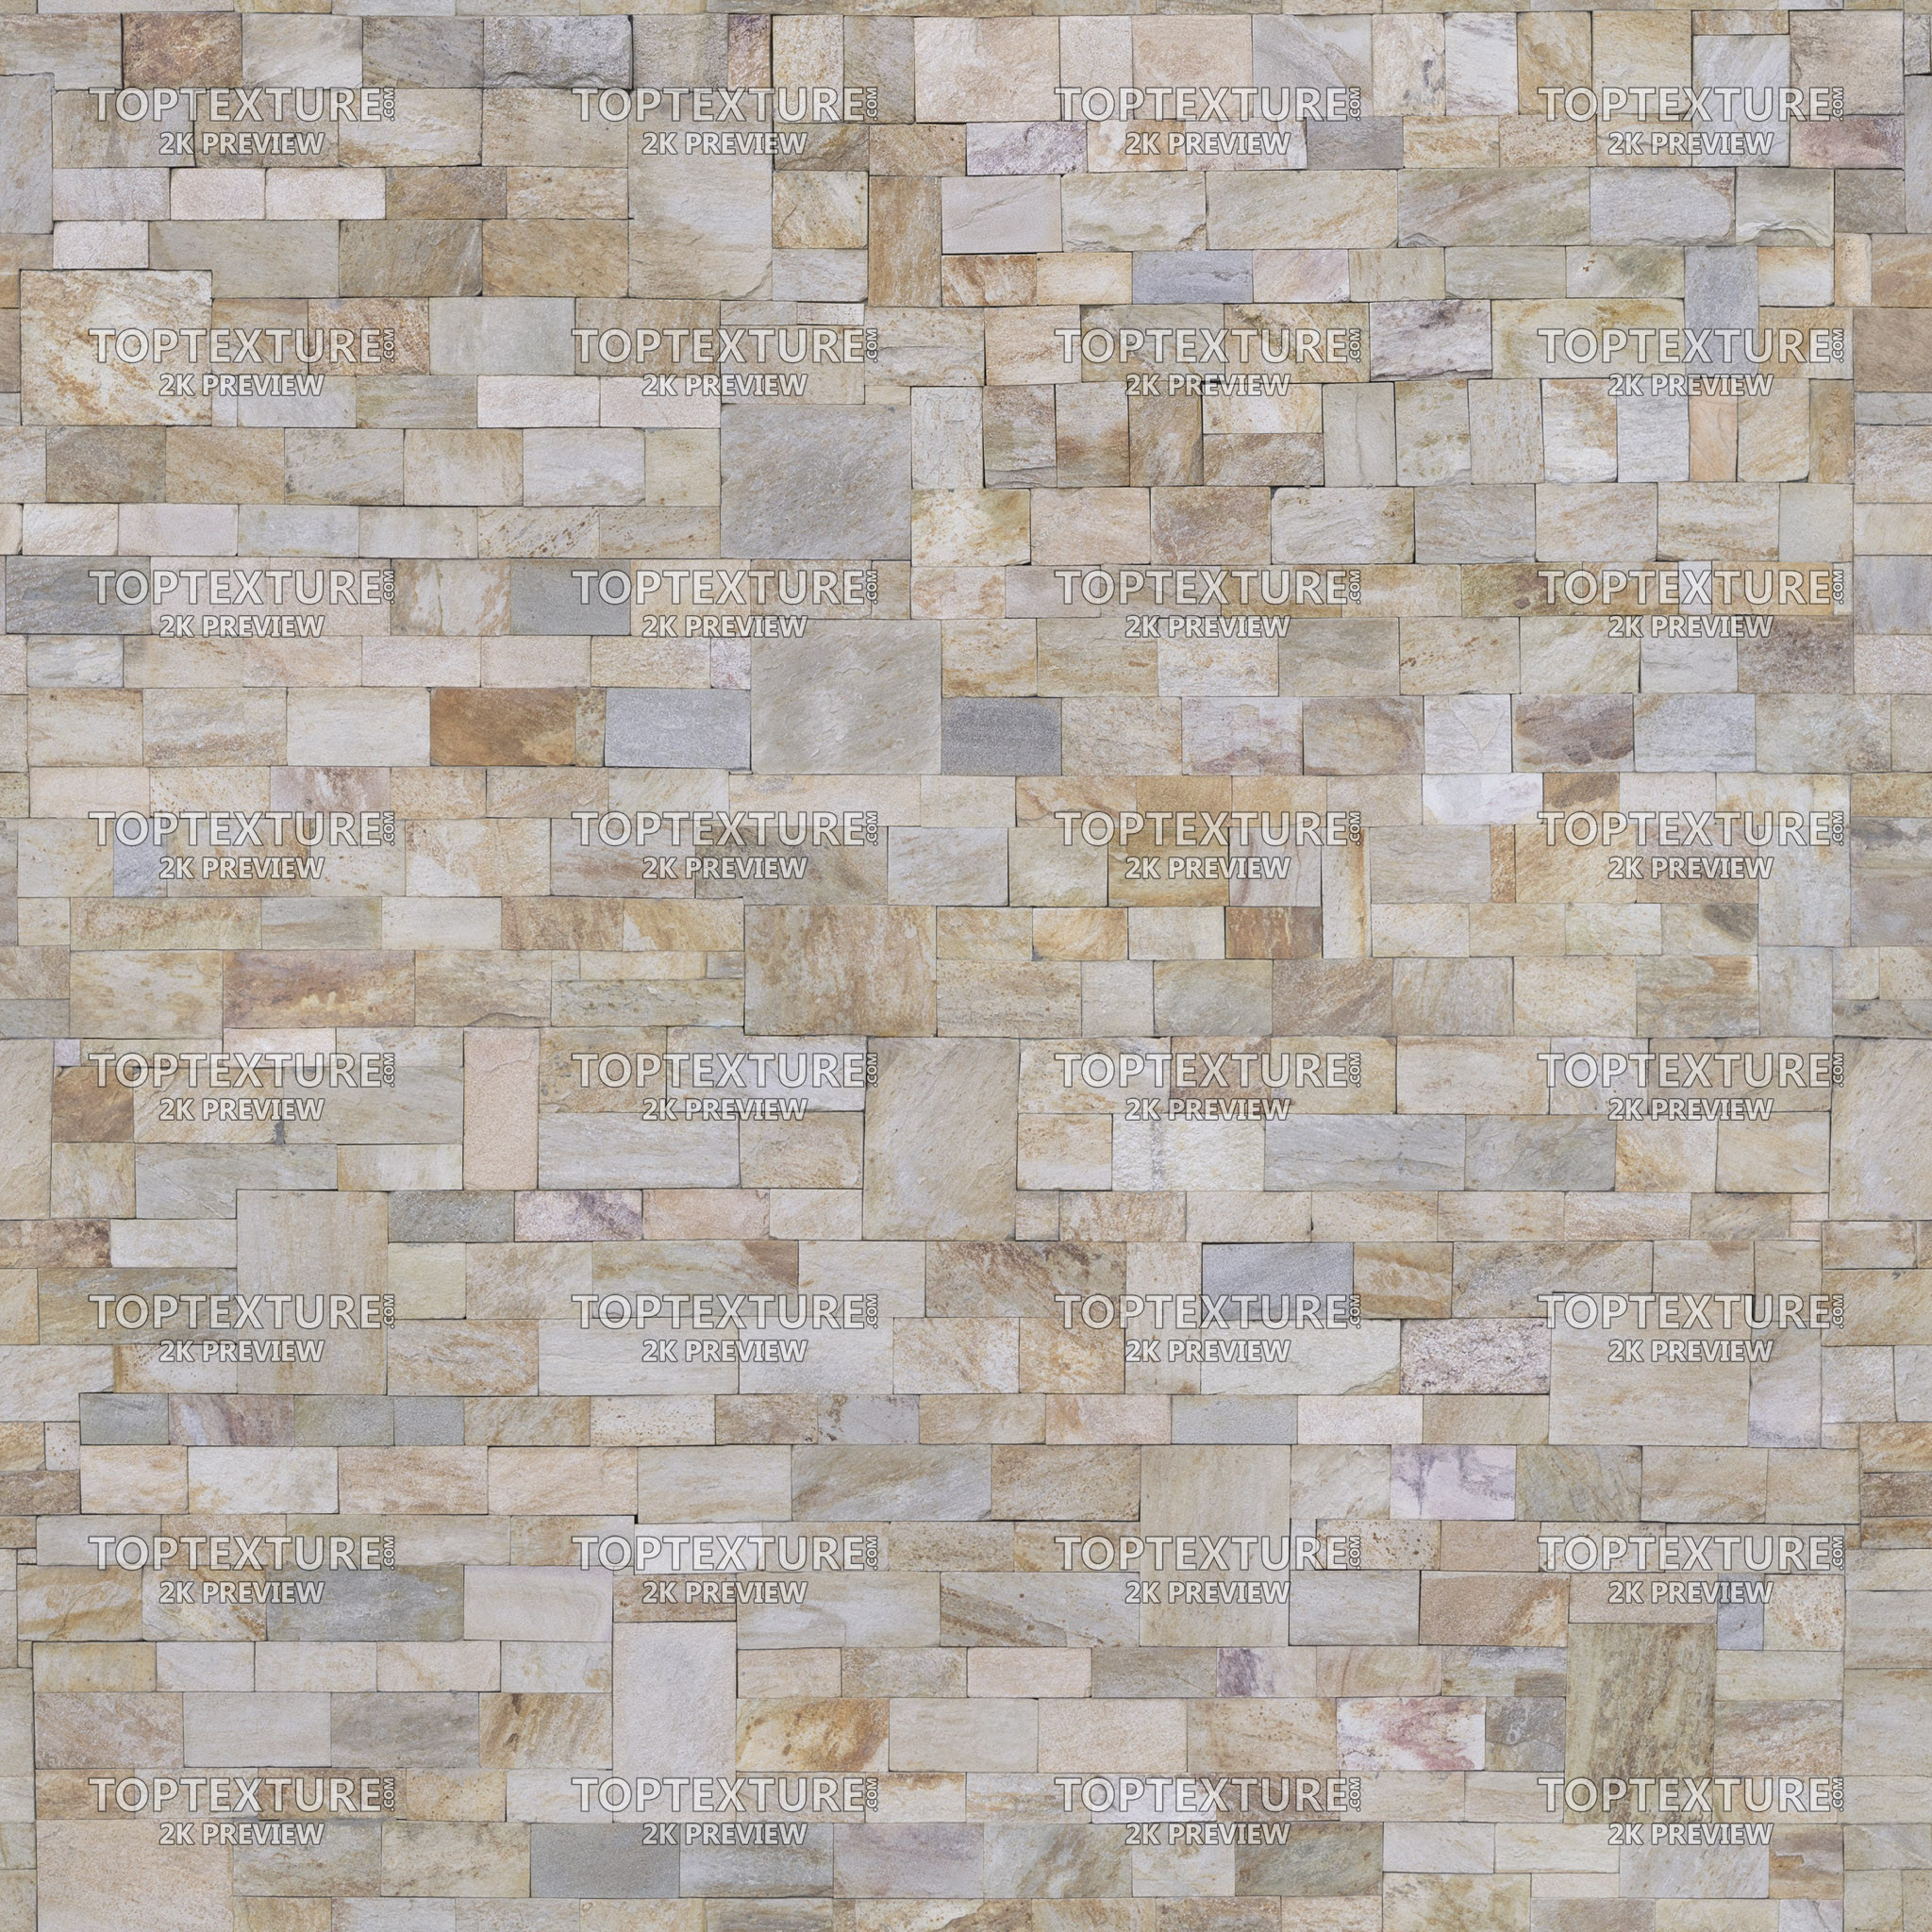 Rectangular Stone Wall Tiles of Different Sizes - 2K preview